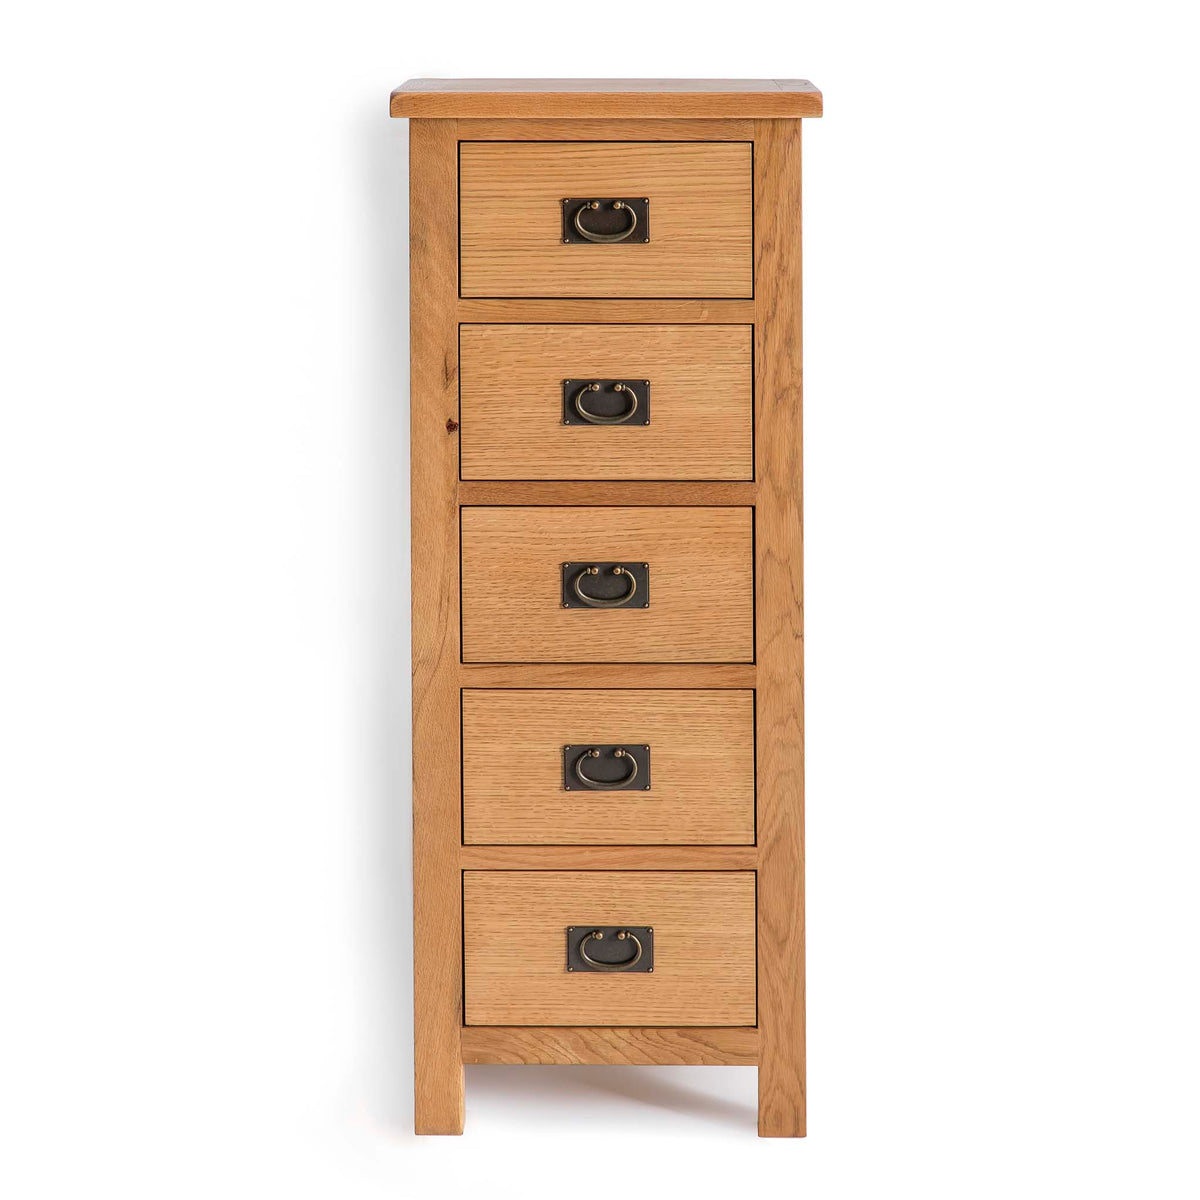 Surrey Oak 5 drawer tallboy chest of 5 drawers by Roseland Furniture